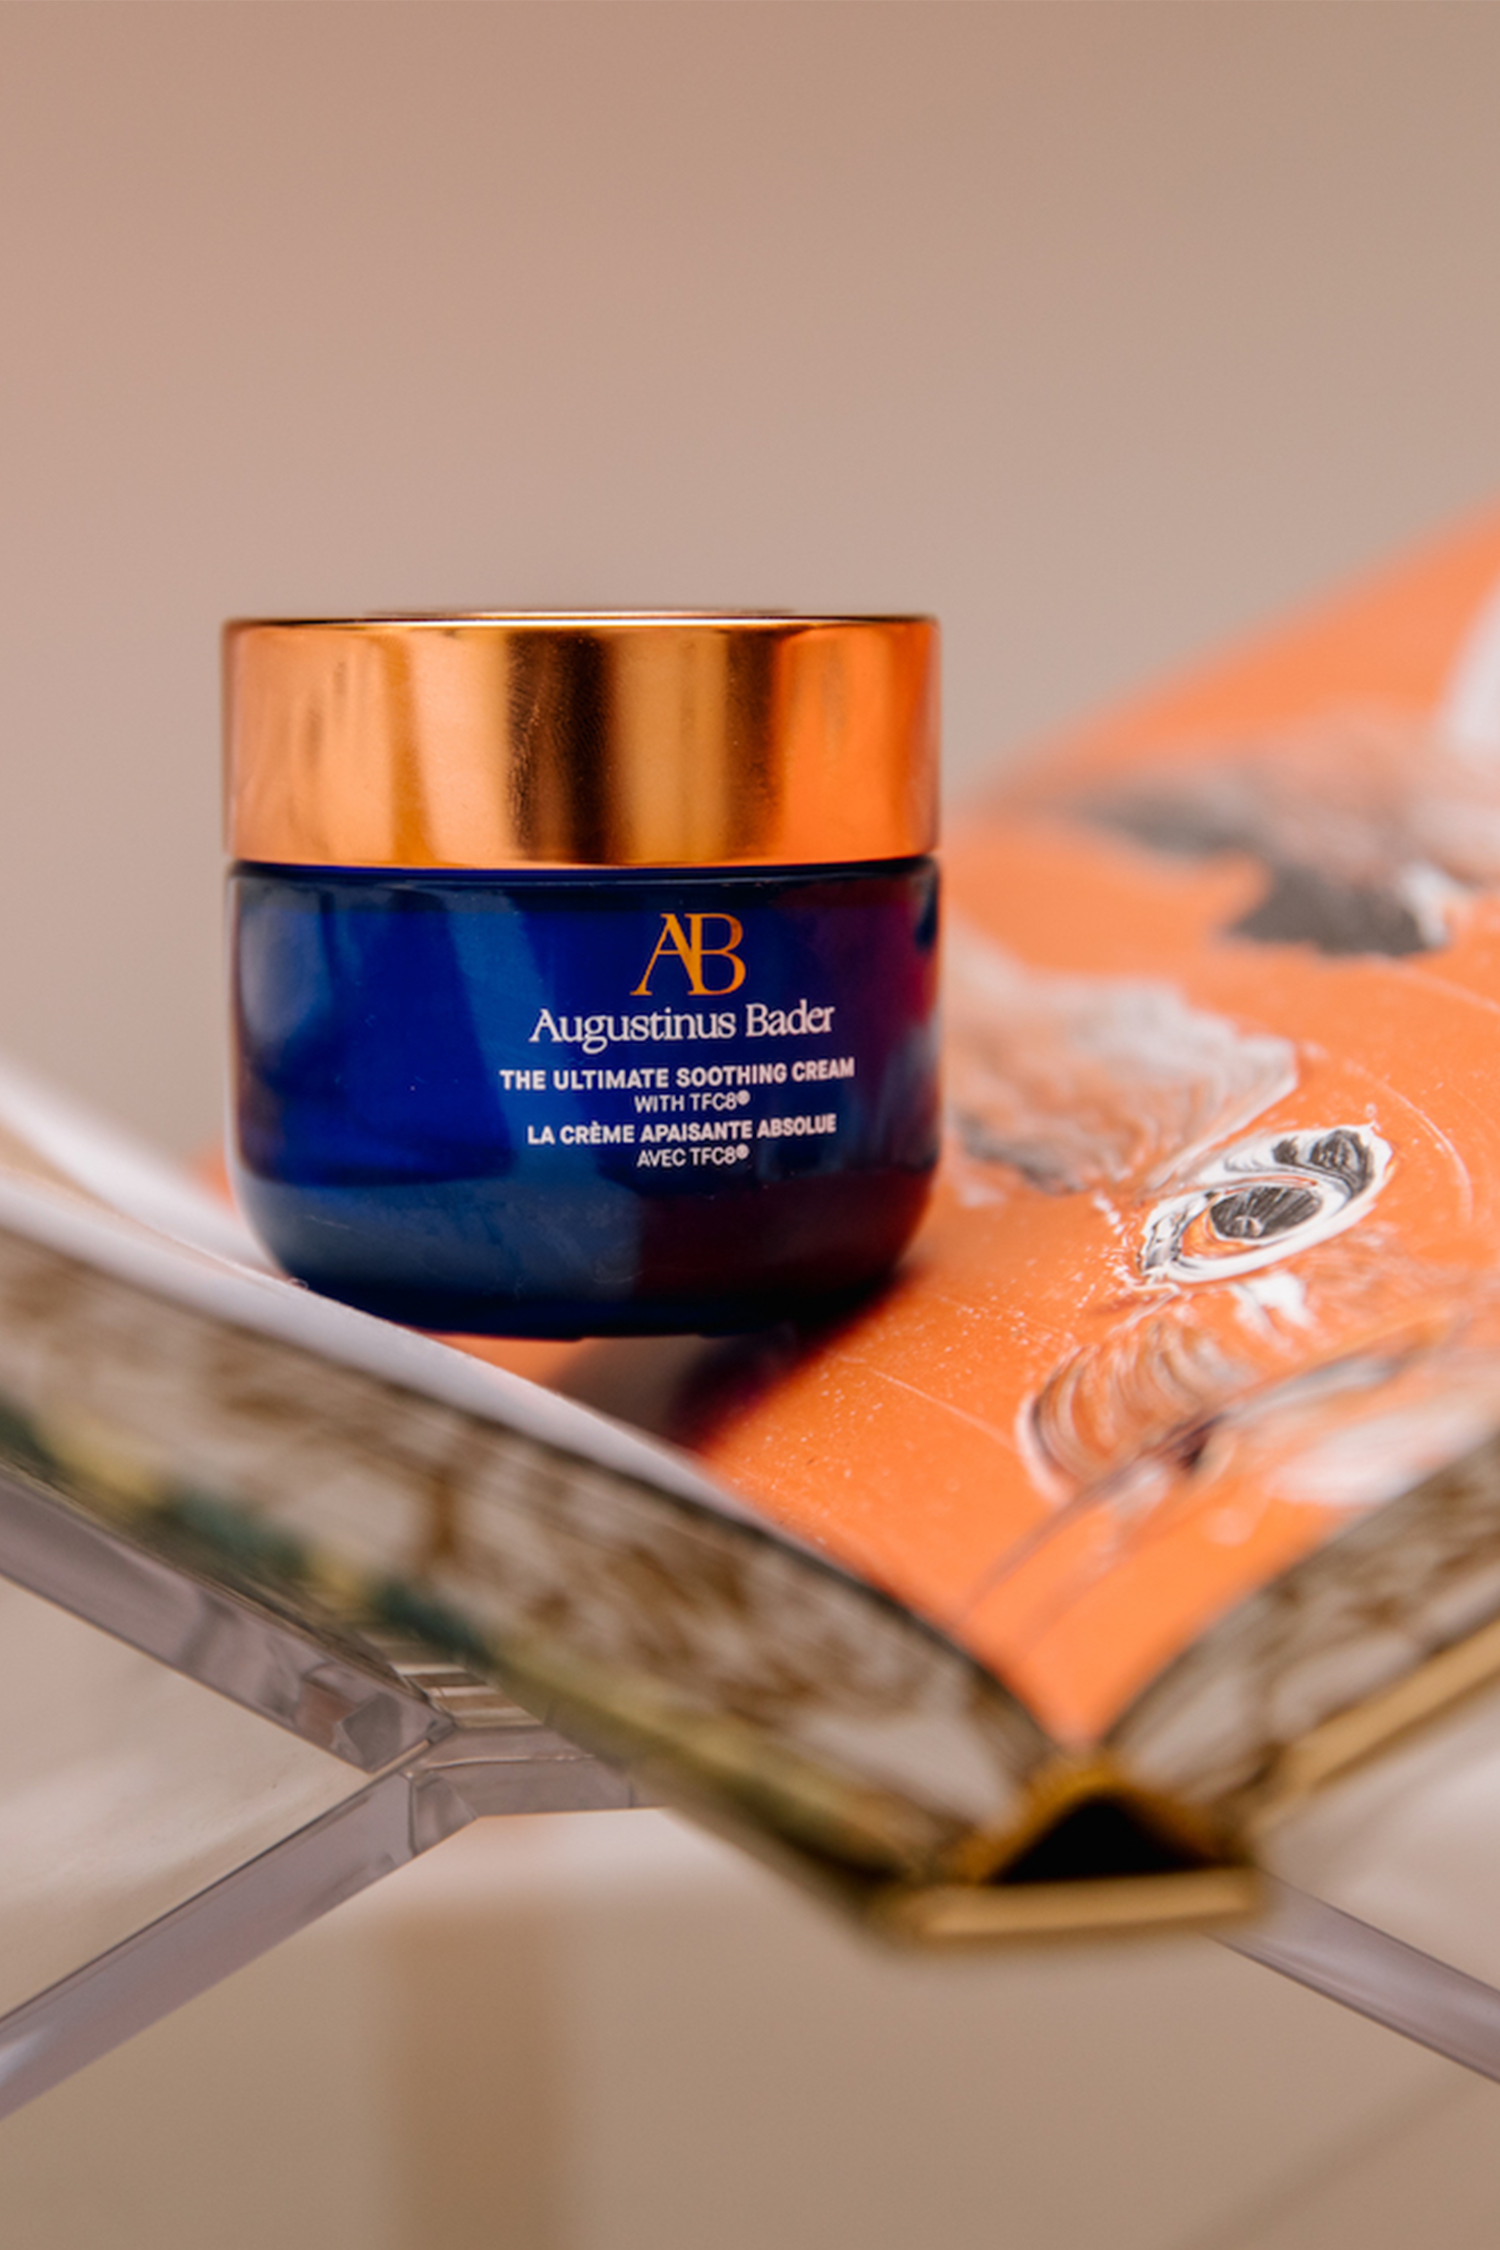 Augustinus Bader Review: The Ultimate Soothing Cream